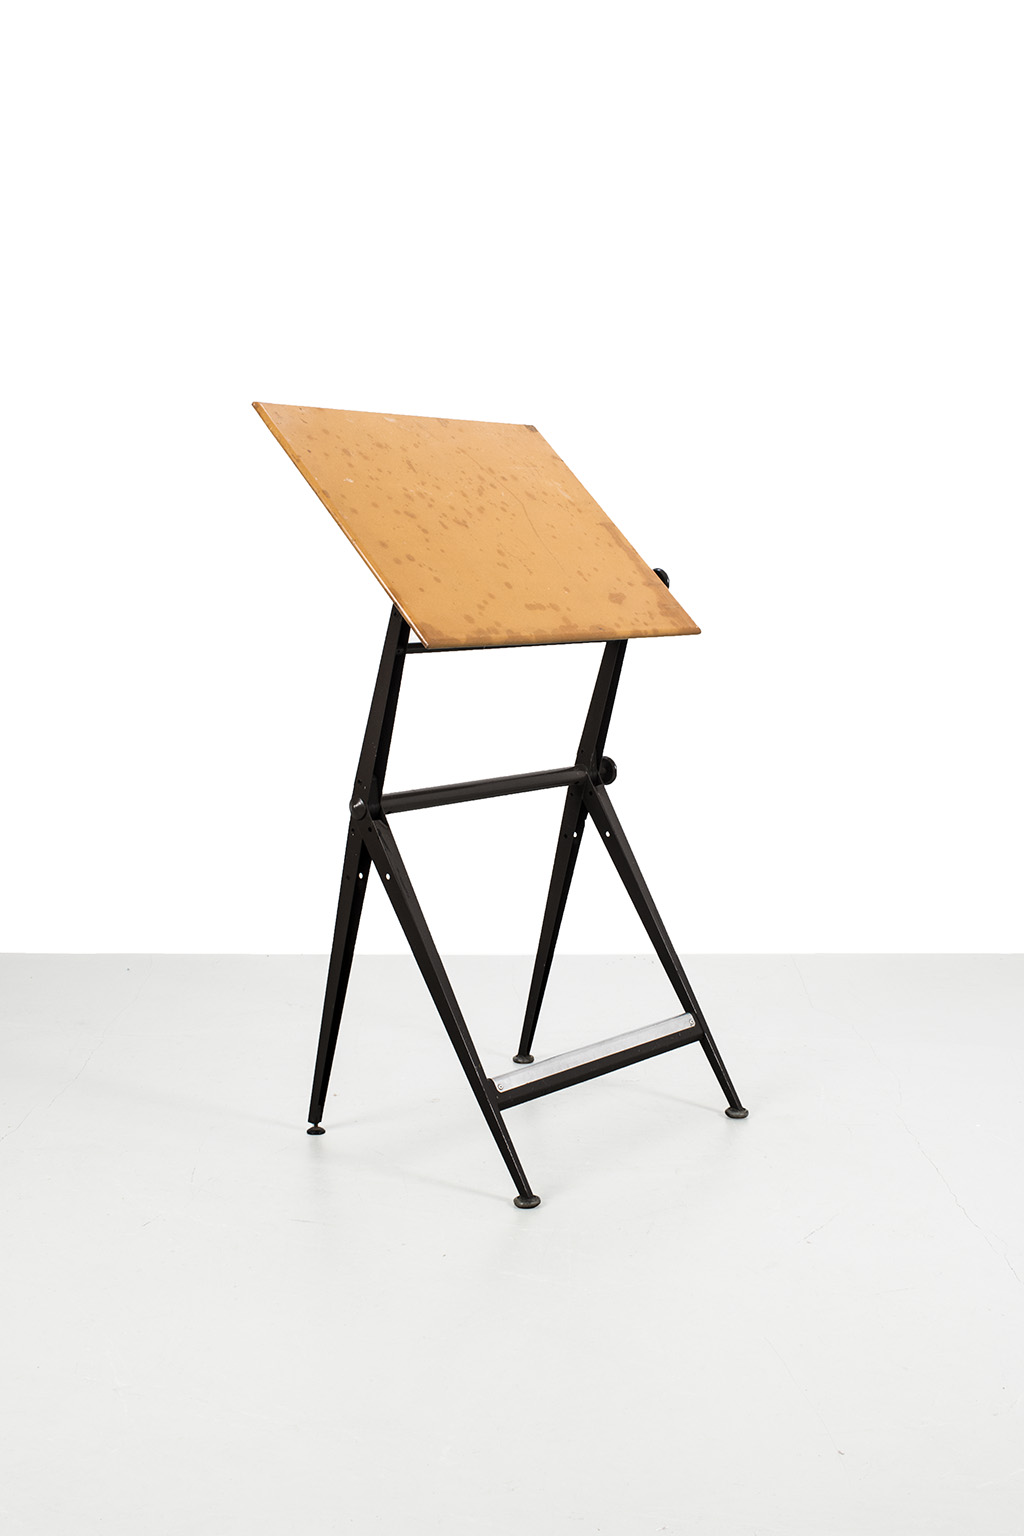 Drawing table Friso Kramer for Ahrend